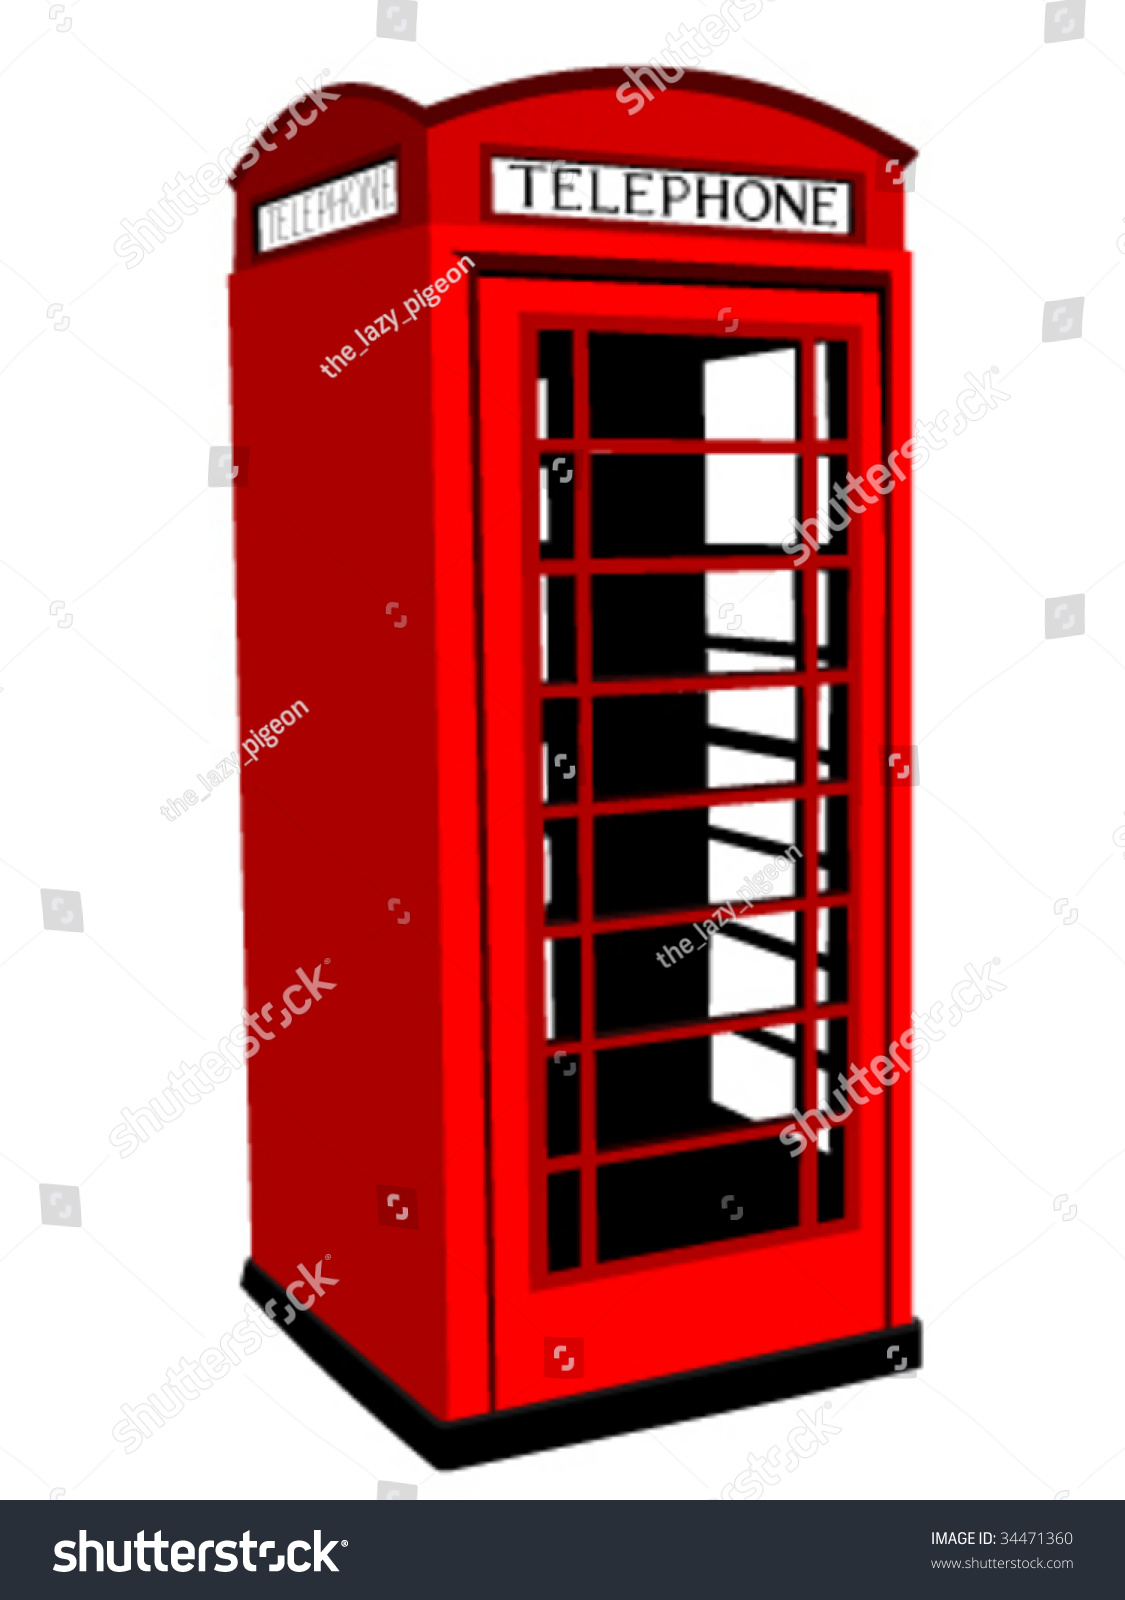 free clip art phone booth - photo #22